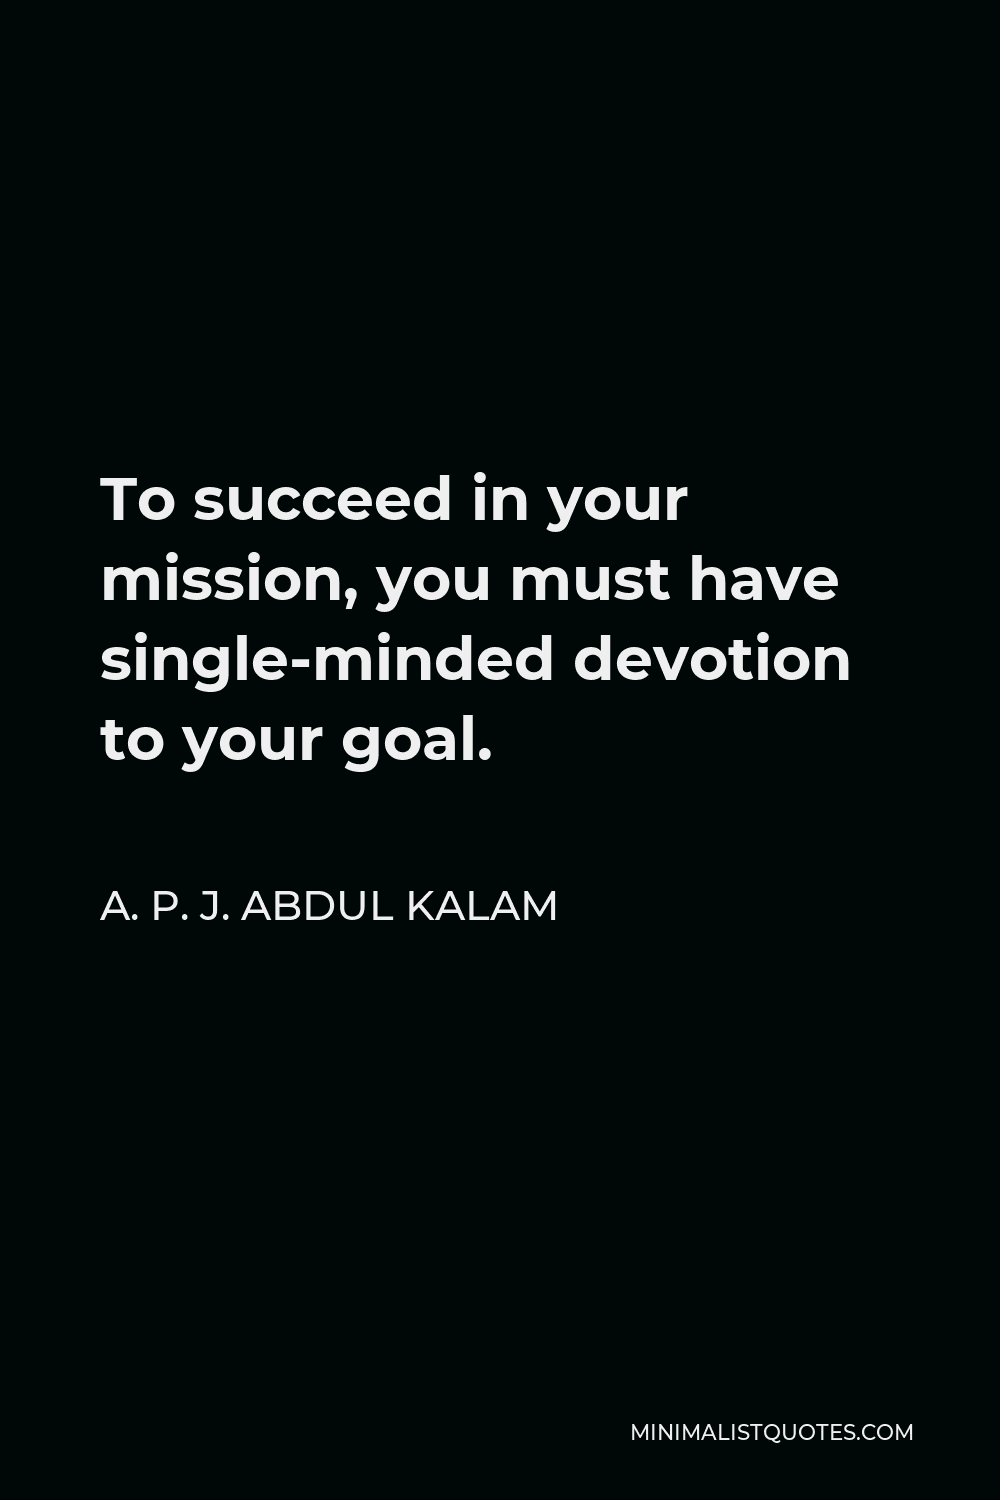 A. P. J. Abdul Kalam Quote - To succeed in your mission, you must have single-minded devotion to your goal.